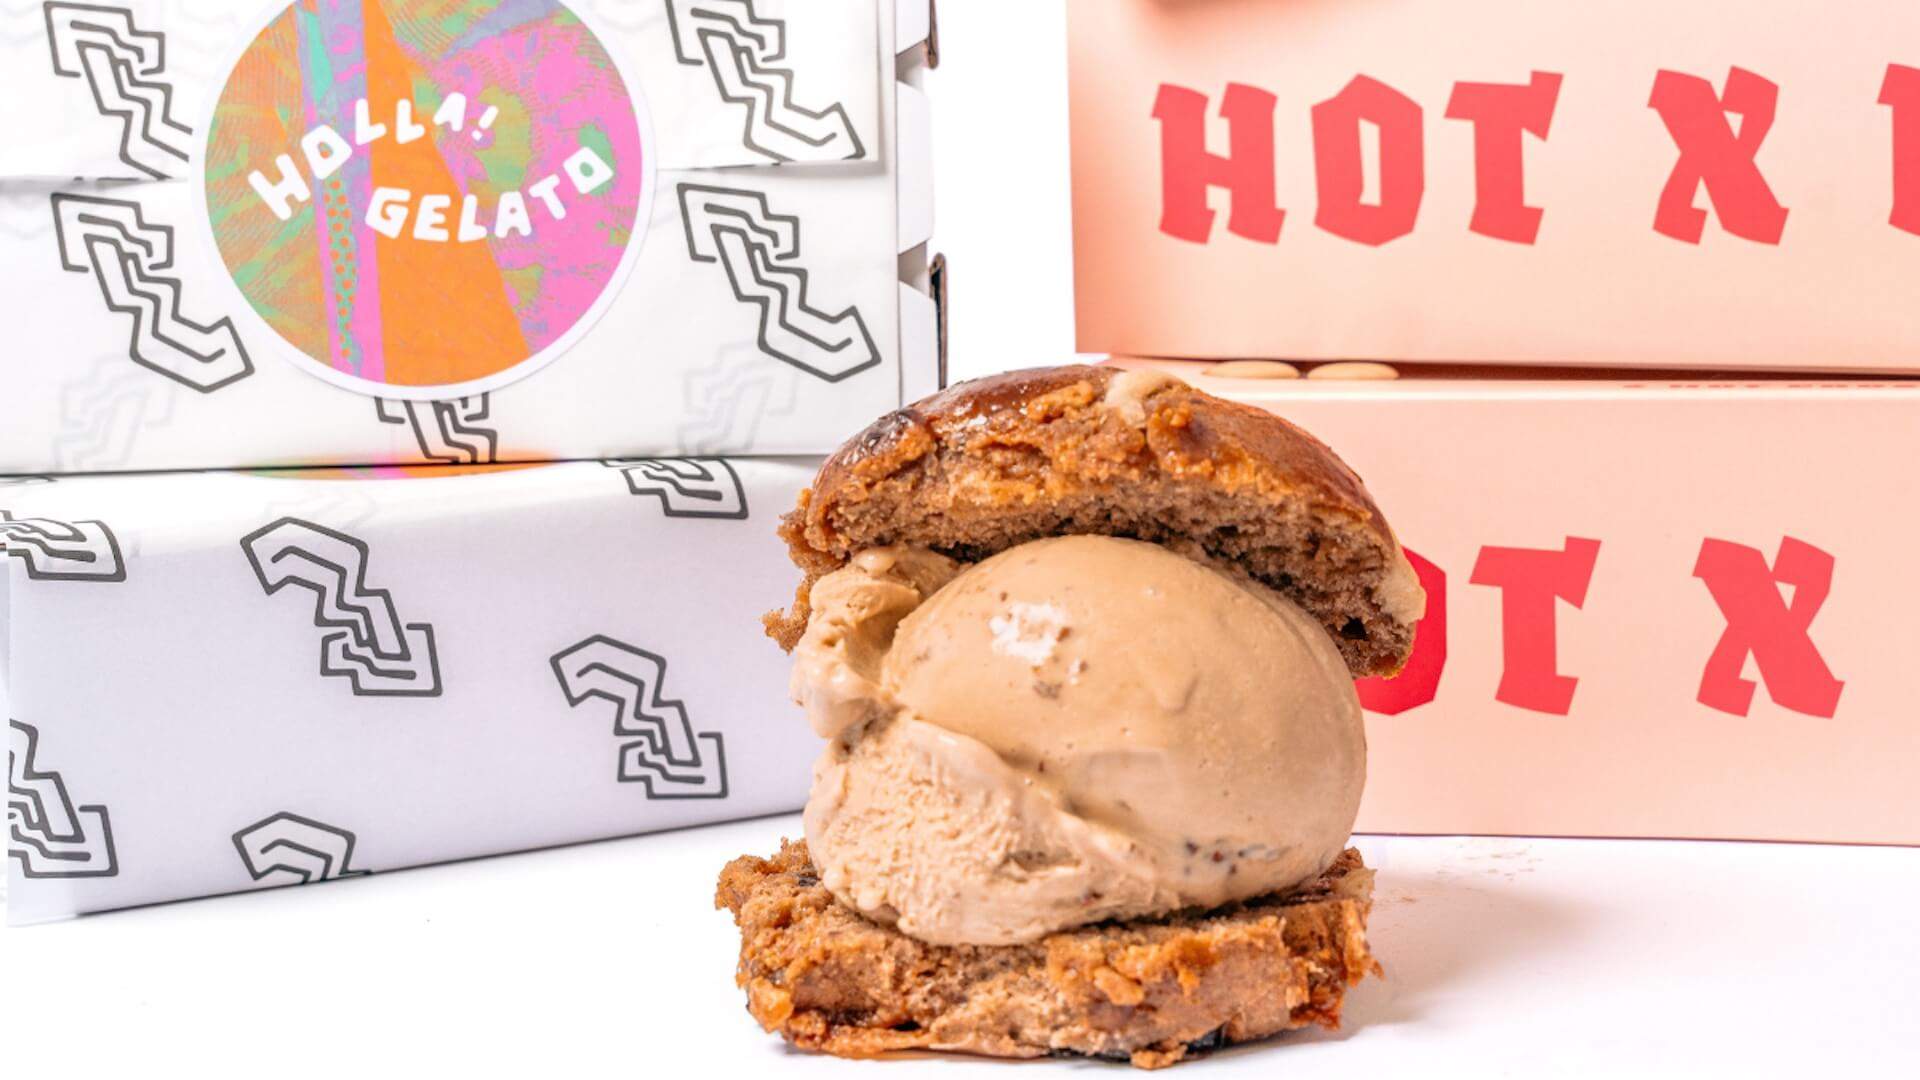 Penny for Pound Is Teaming Up with Holla Gelato on Epic Hot Cross Bun Gelato Sandwiches for Easter